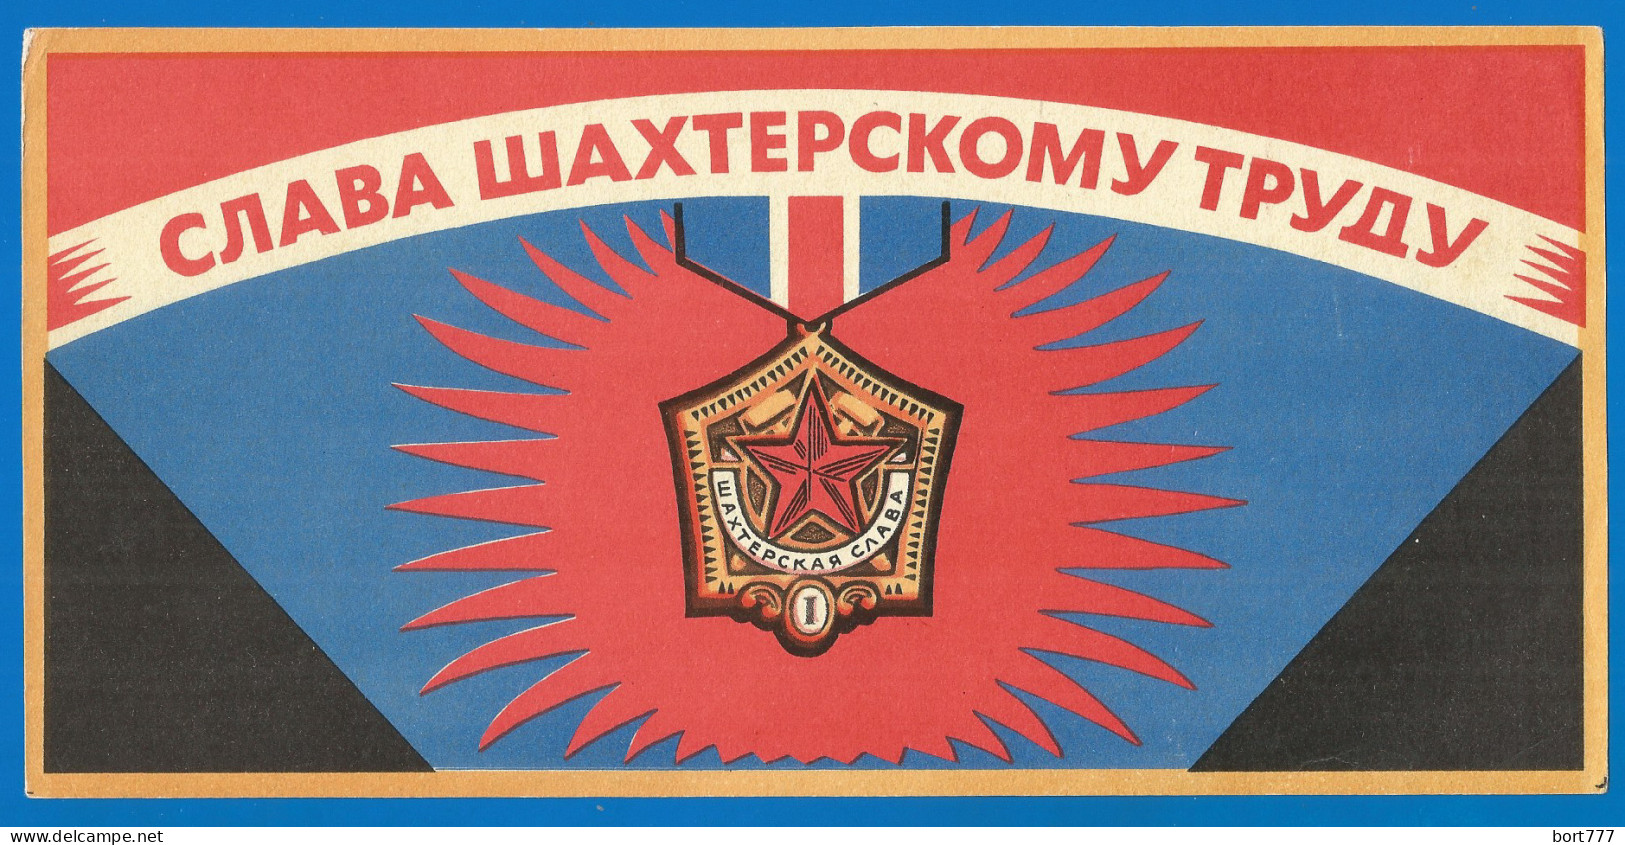 RUSSIA 1970 GROSS Matchbox Label - Glory To The Miners' Work(catalog # 214) - Matchbox Labels